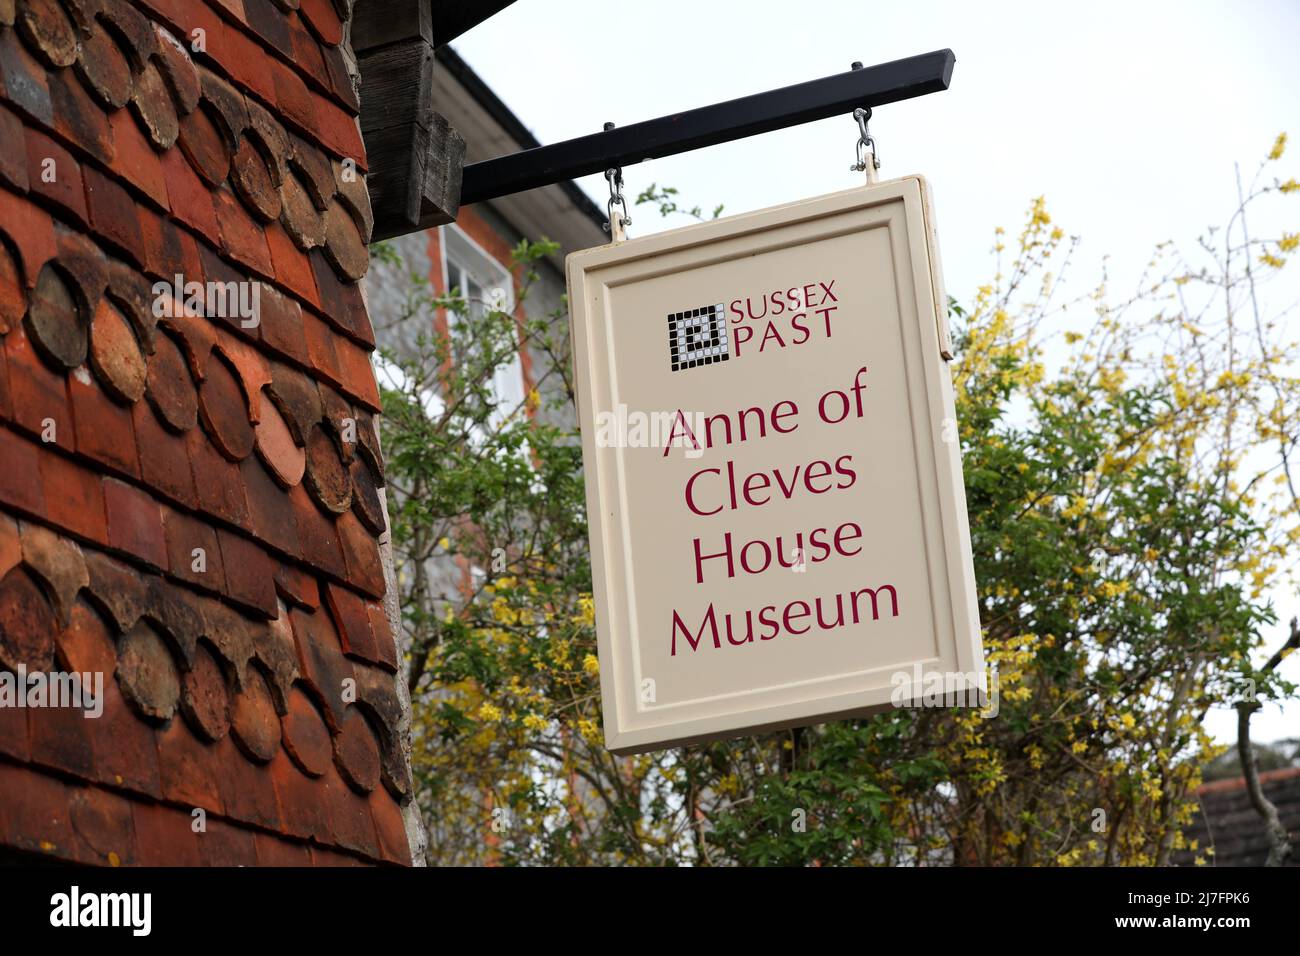 Easter activities at Anne of Cleves House Museum in Lewes, East Sussex, UK, run by Sussex Past. Stock Photo